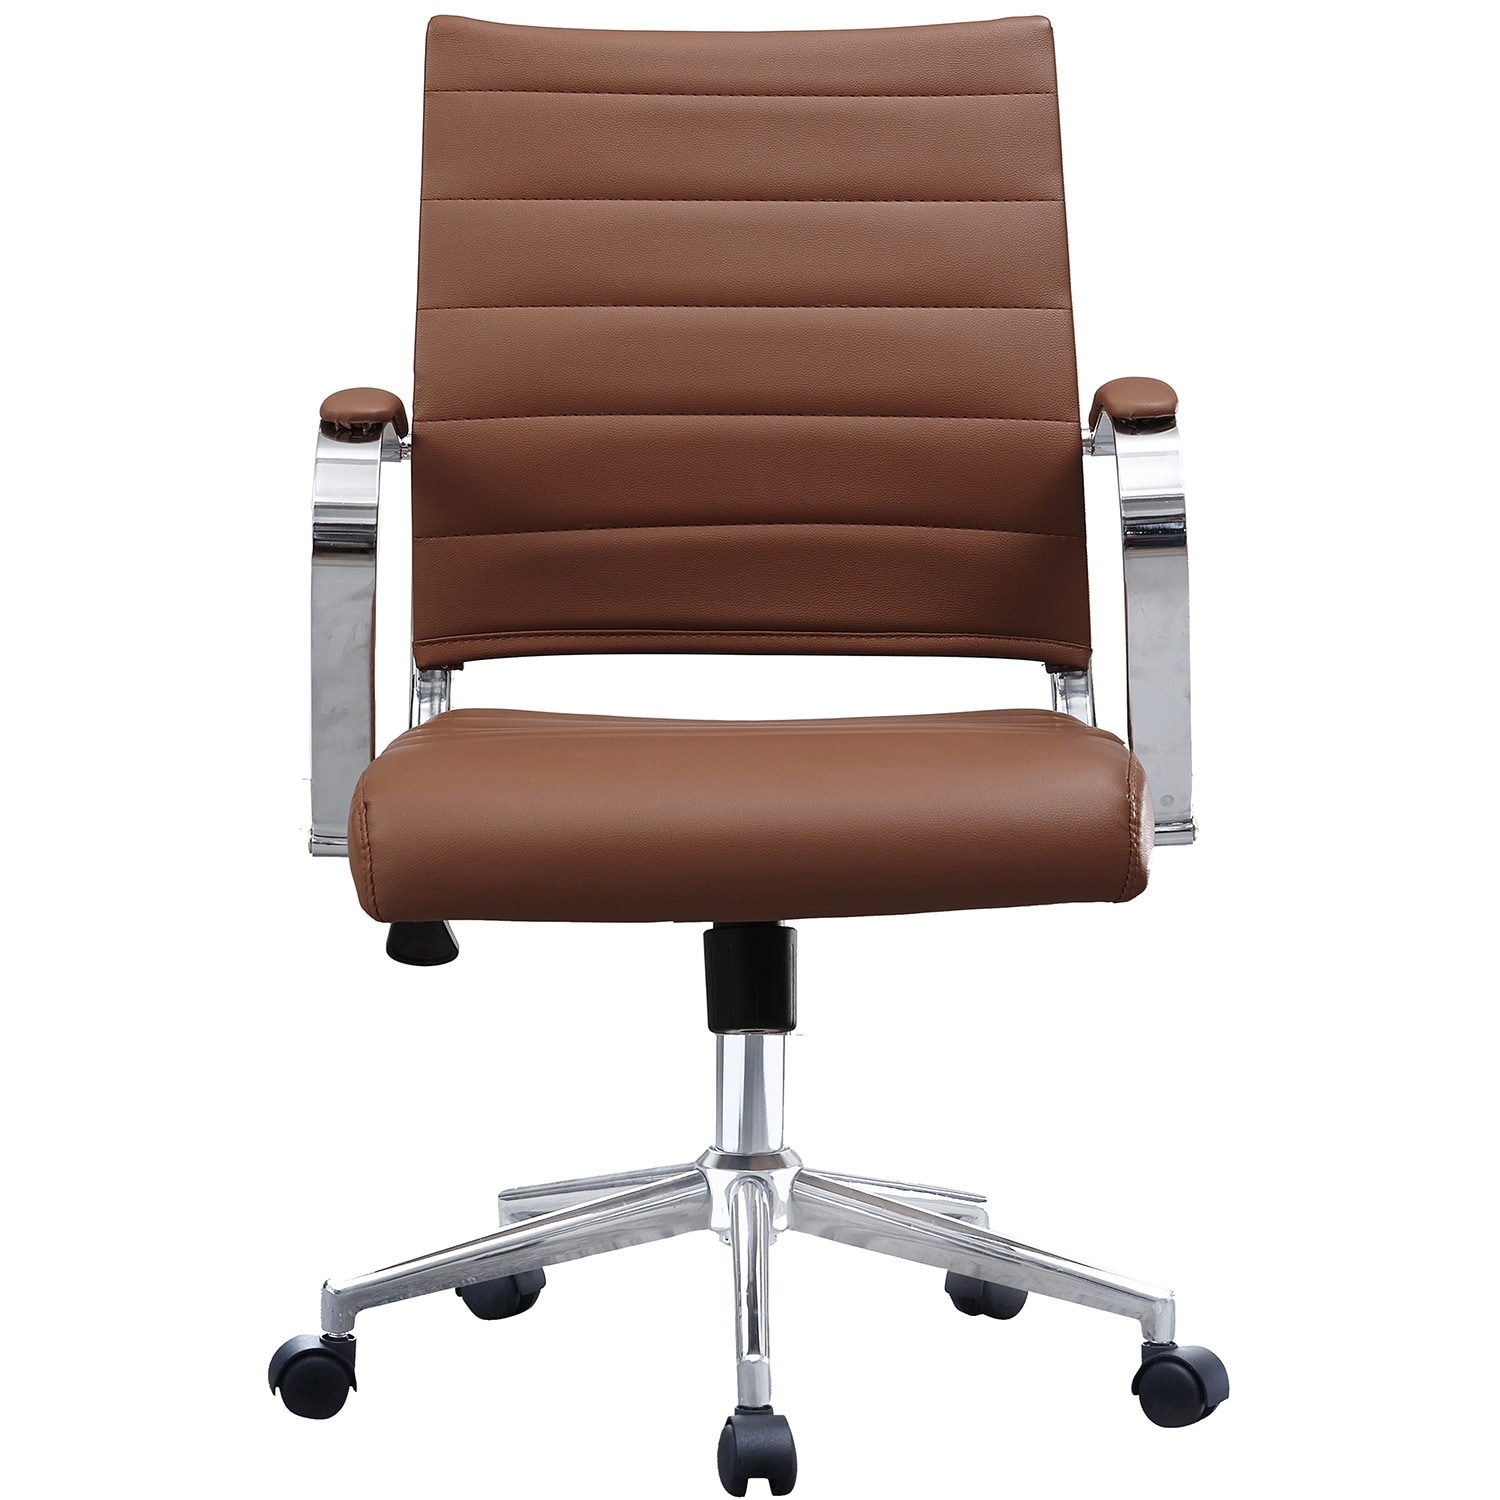 https://ak1.ostkcdn.com/images/products/is/images/direct/e5e5780c6faf8c2cd10296a6e4c2e32b1e59eaaf/Modern-Office-Chair%2C-Executive-Mid-Back-Conference-Room-Chair-in-PU-Leather-with-Wheels-and-Arms.jpg